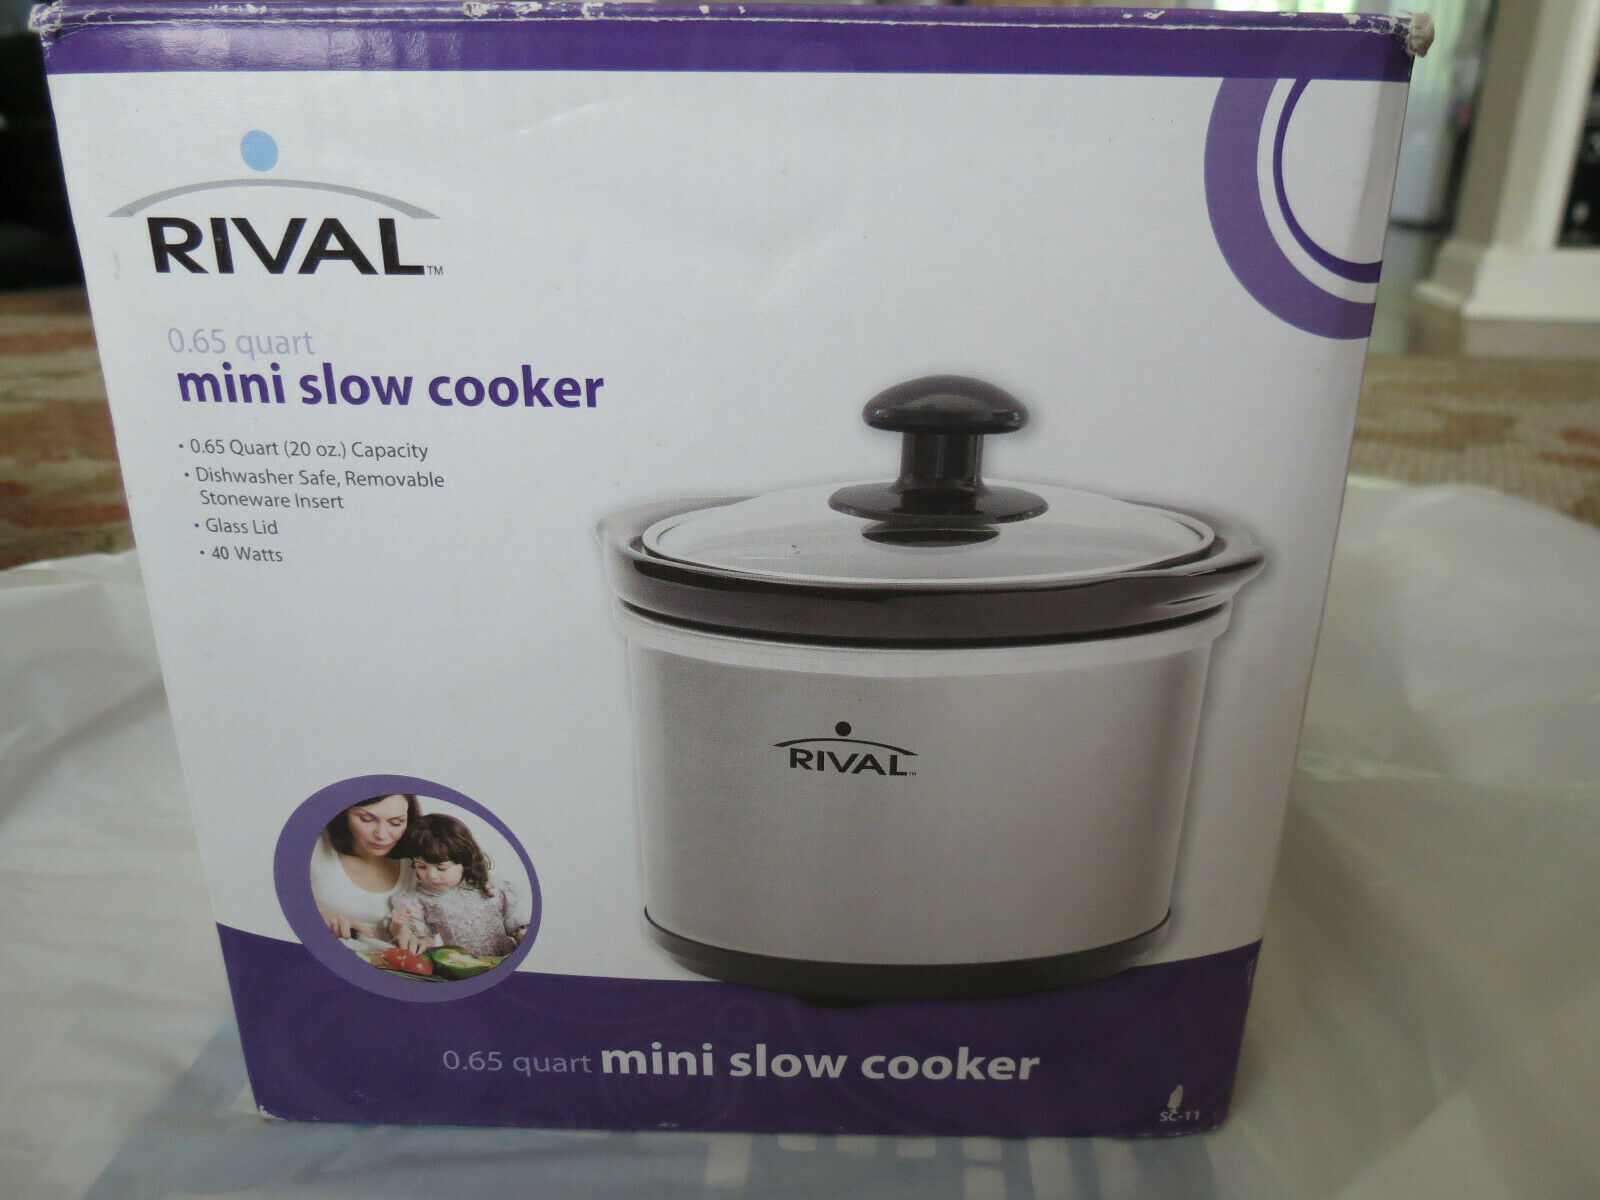 Rival .65-Quart Mini Slow Cooker, Stainless Steel - image 3 of 3